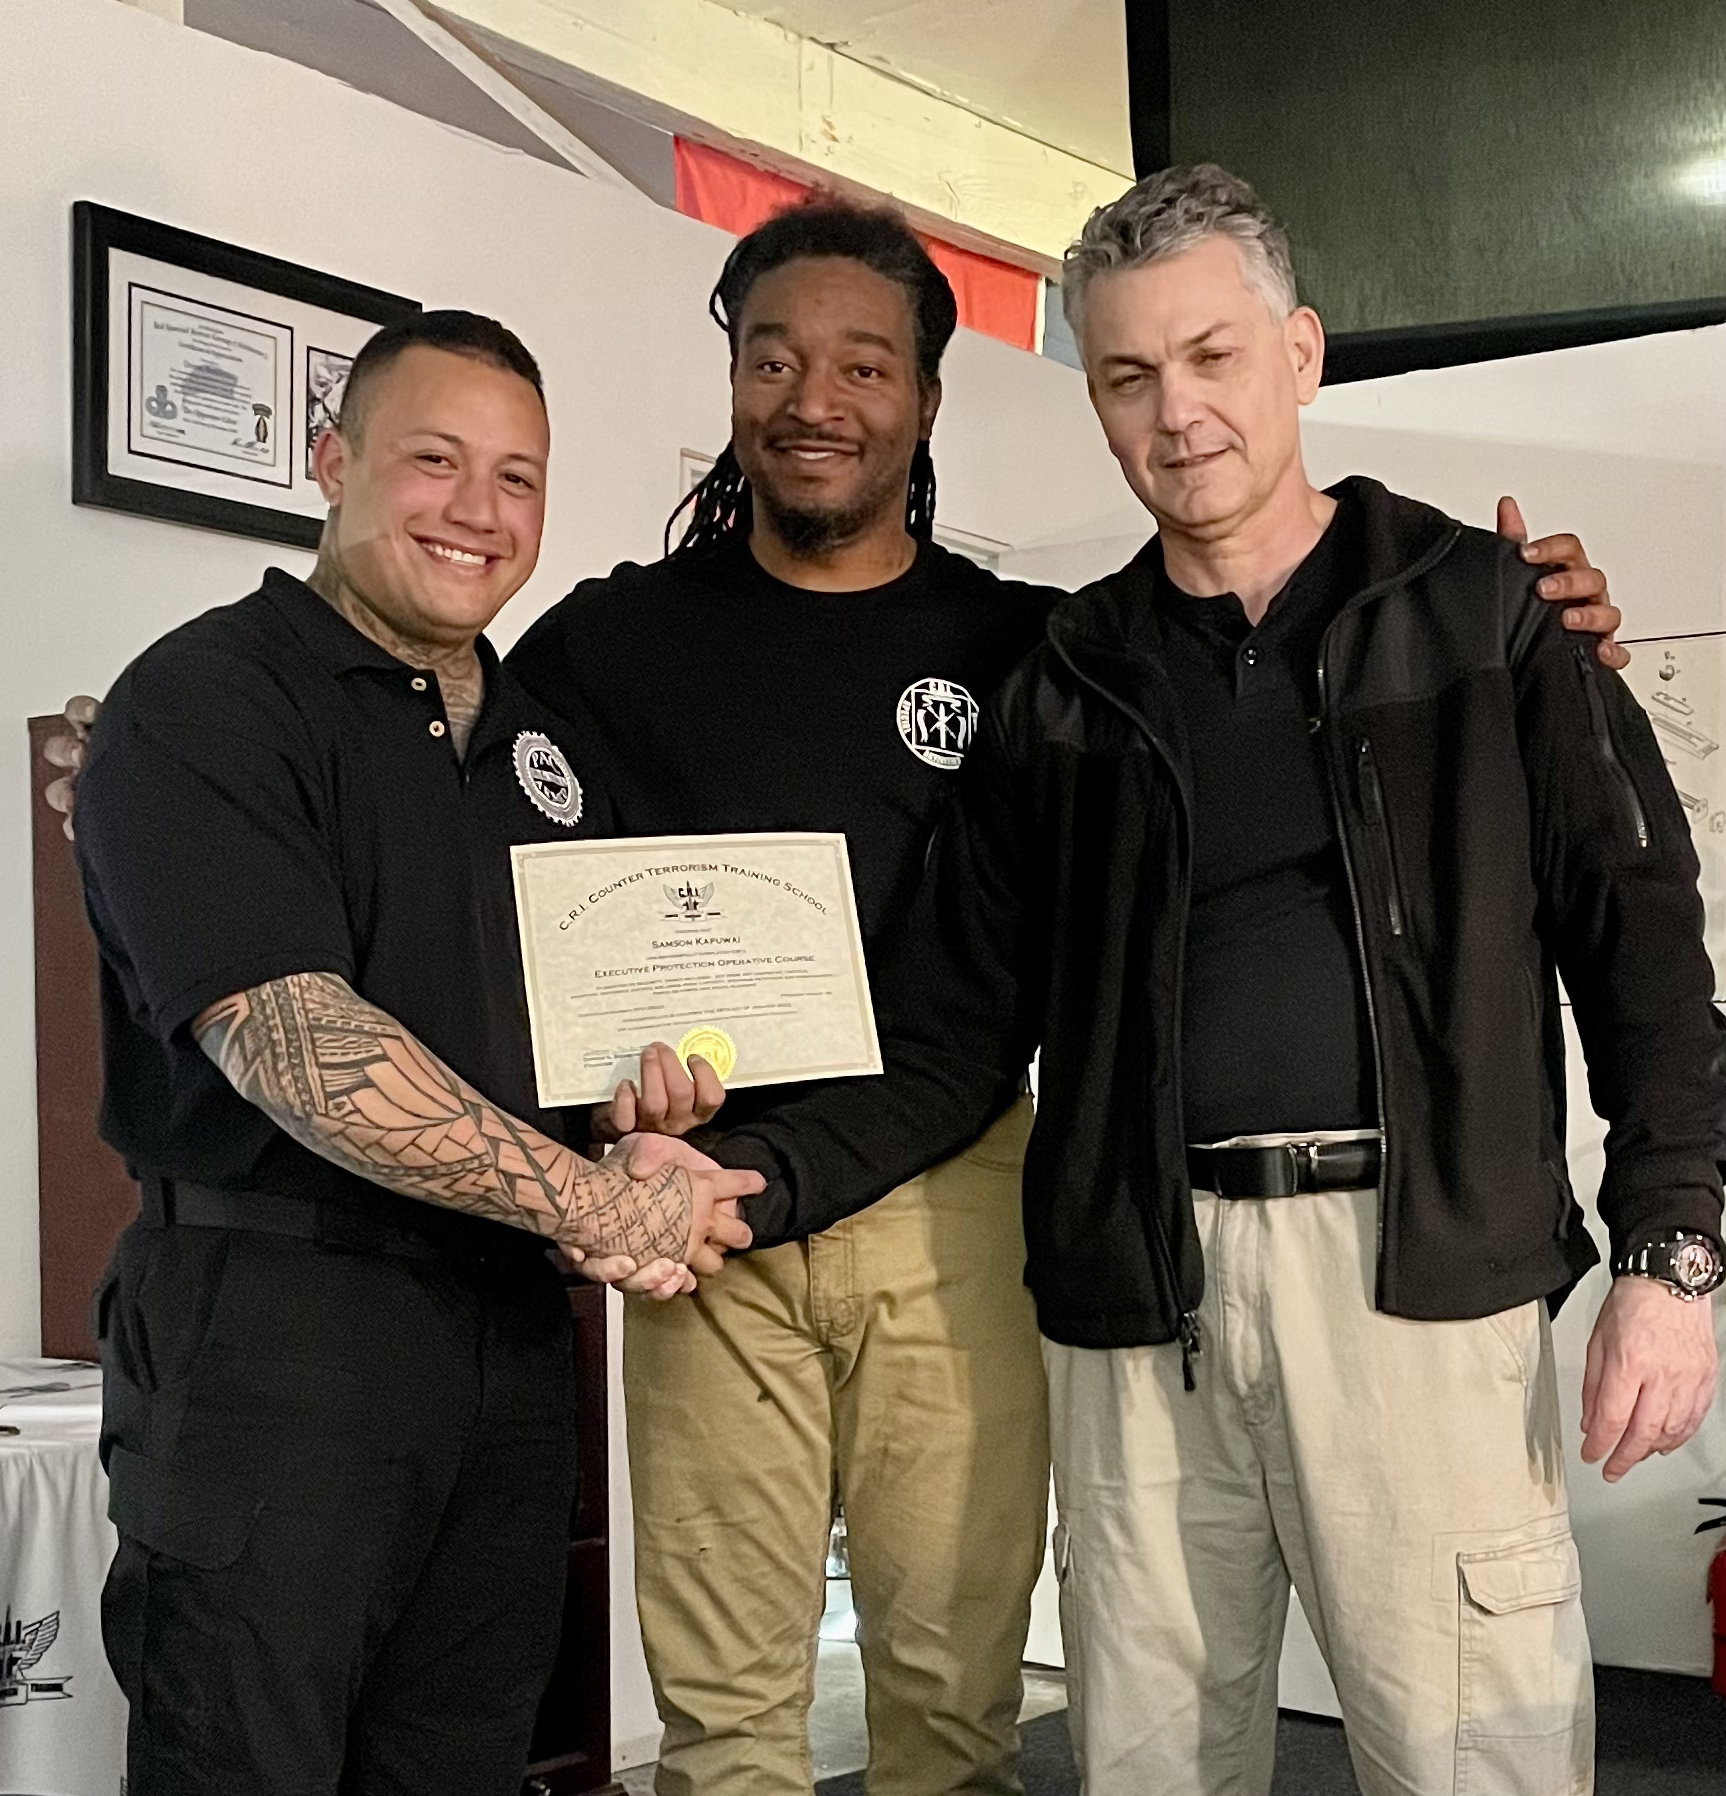 CRI Counter Terrorism Training Certificate Photo with Instructor